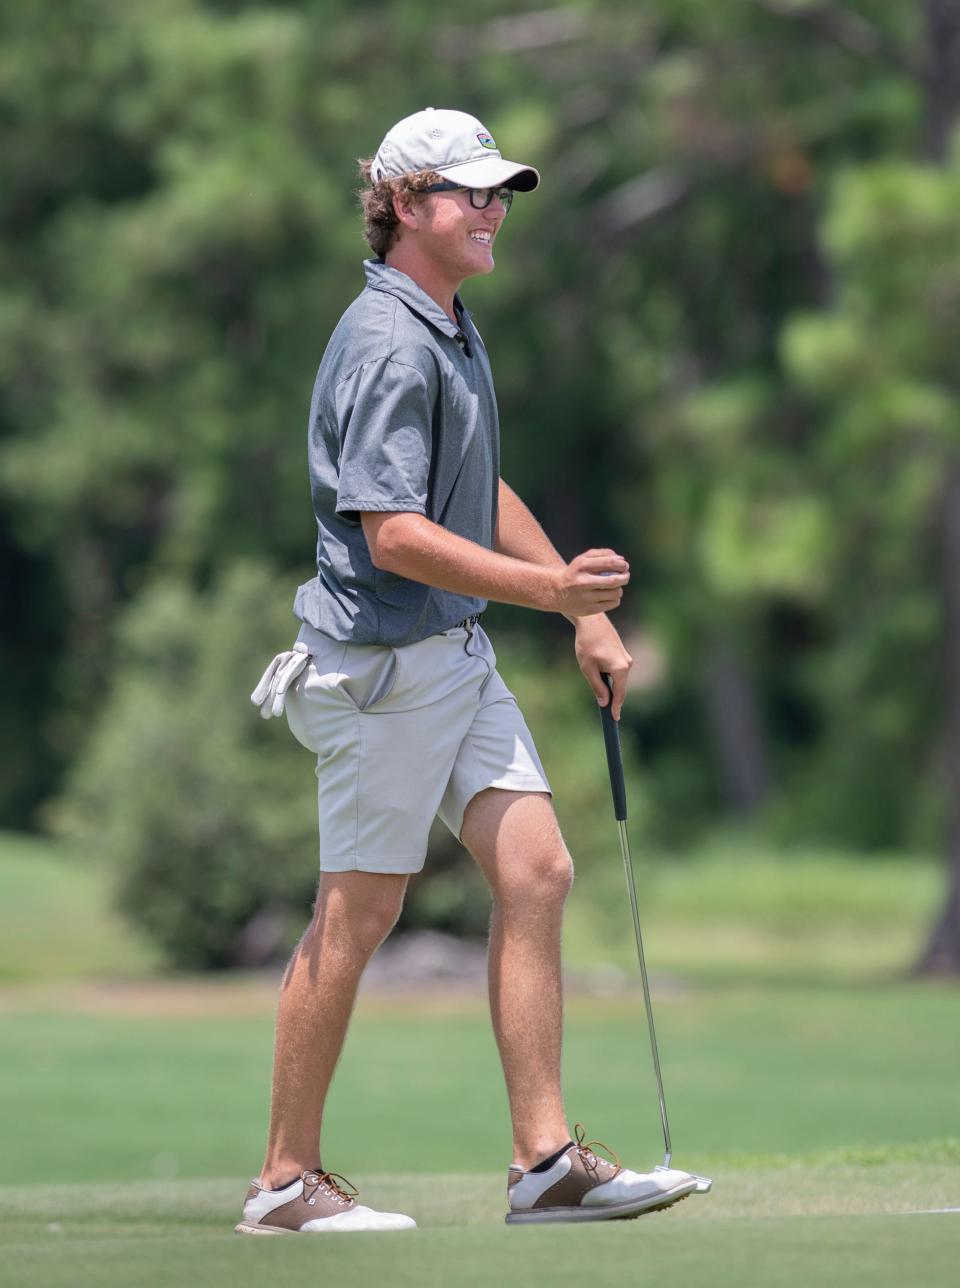 Jack Wallace, of Cantonment, reacts to sinking his putt during the Divot Derby at Tiger Point Golf Club in Gulf Breeze on Wednesday, July 20, 2022.